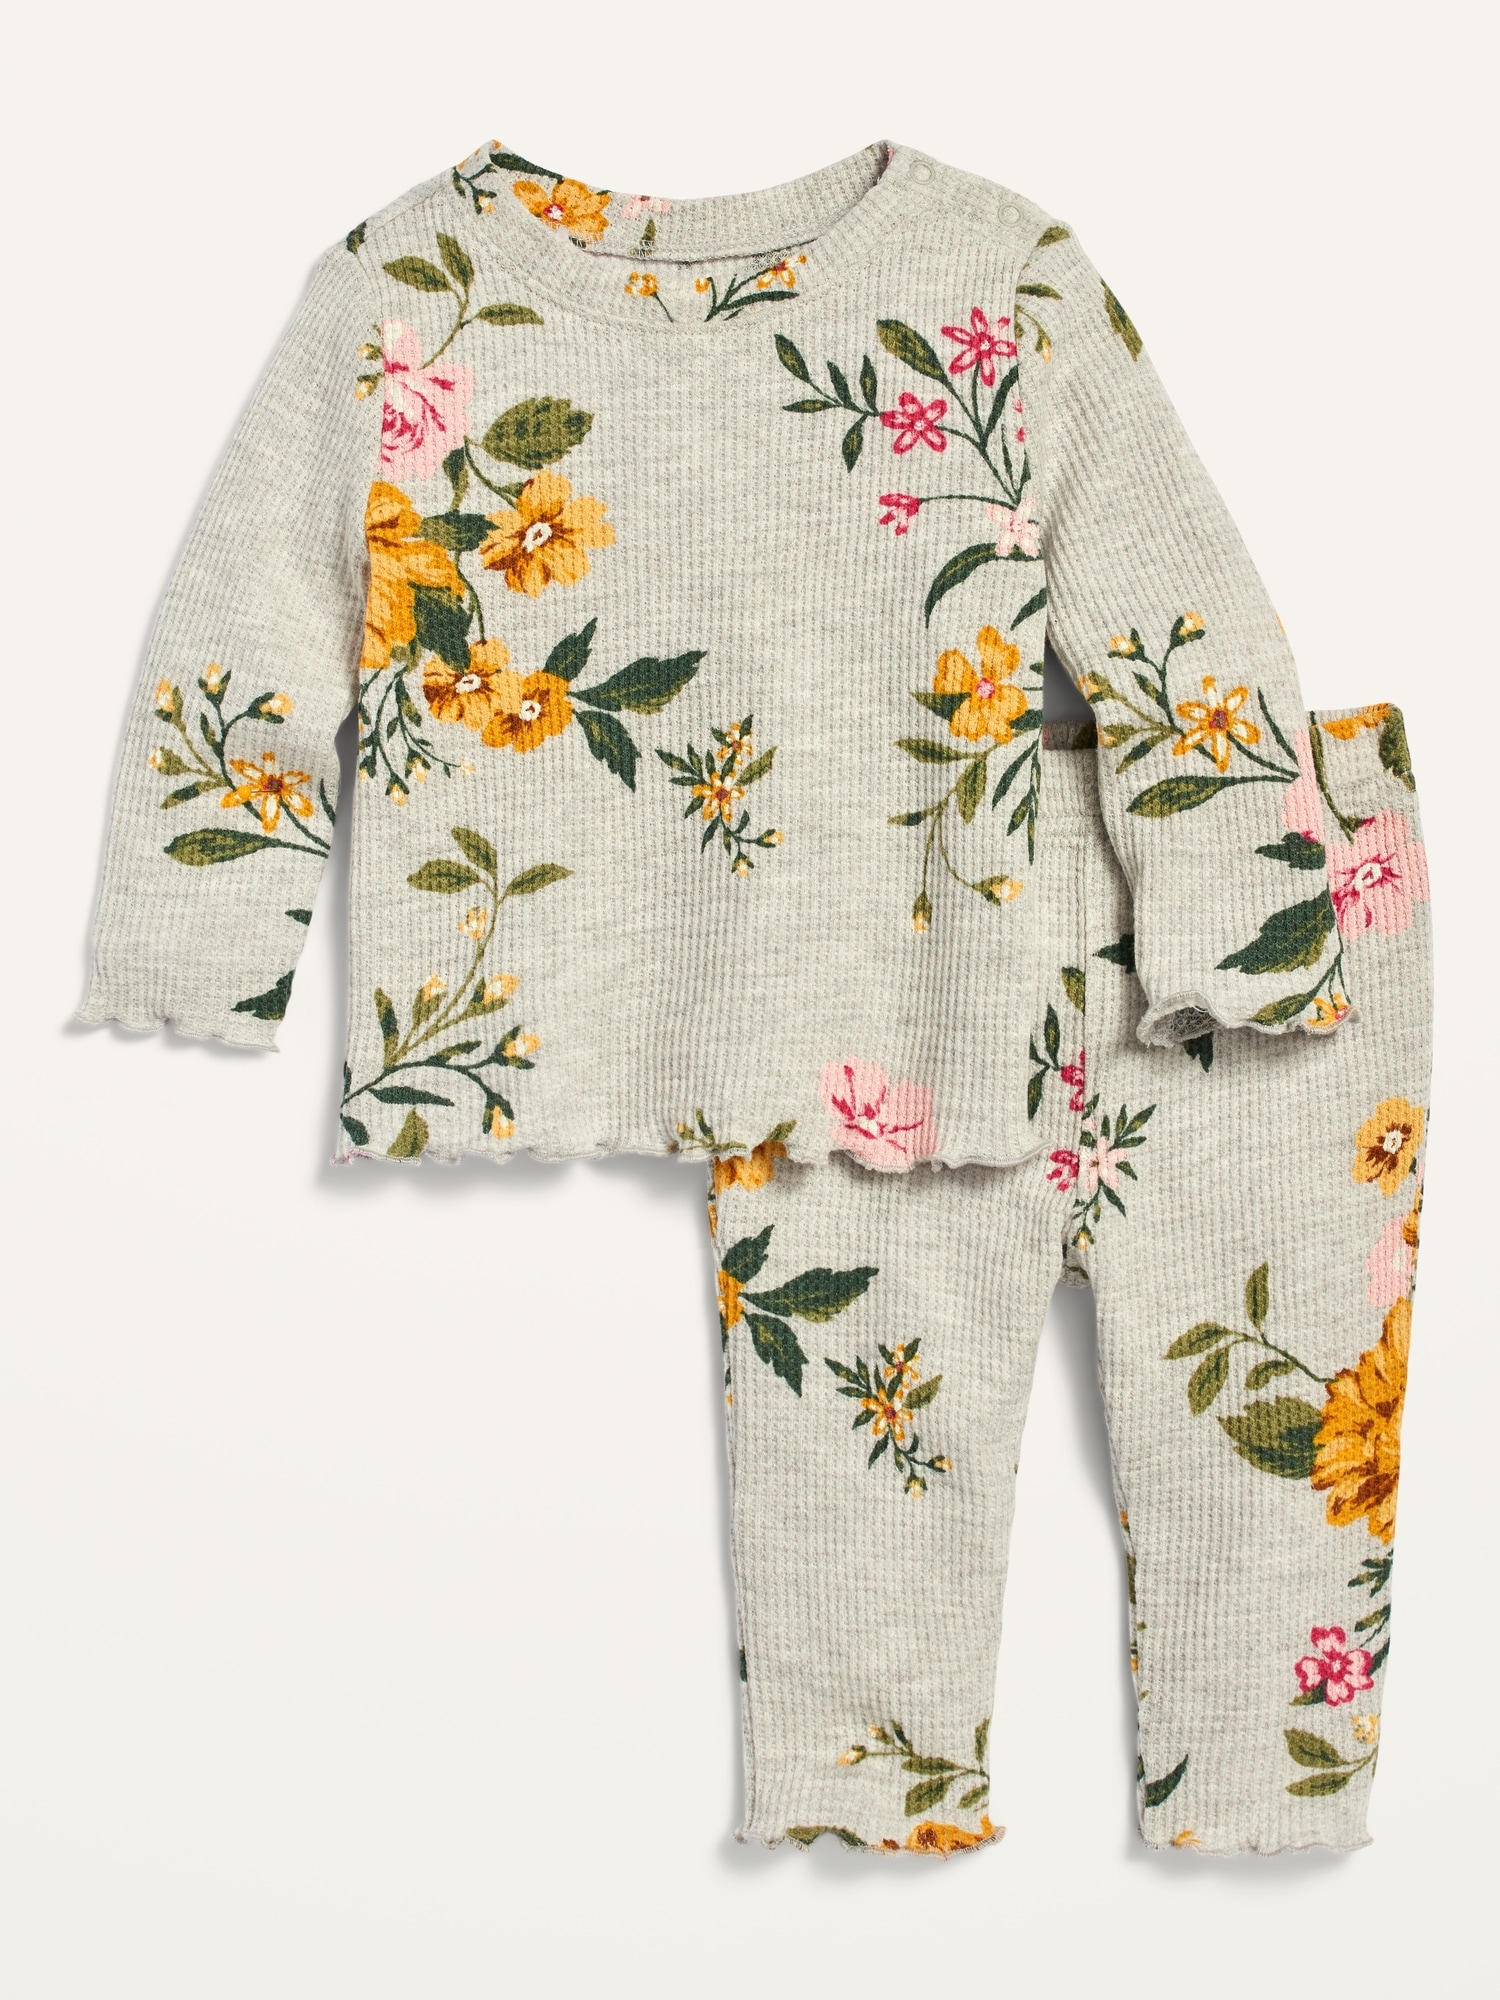 Unisex Cozy Thermal Top and Leggings Set for Baby | Old Navy